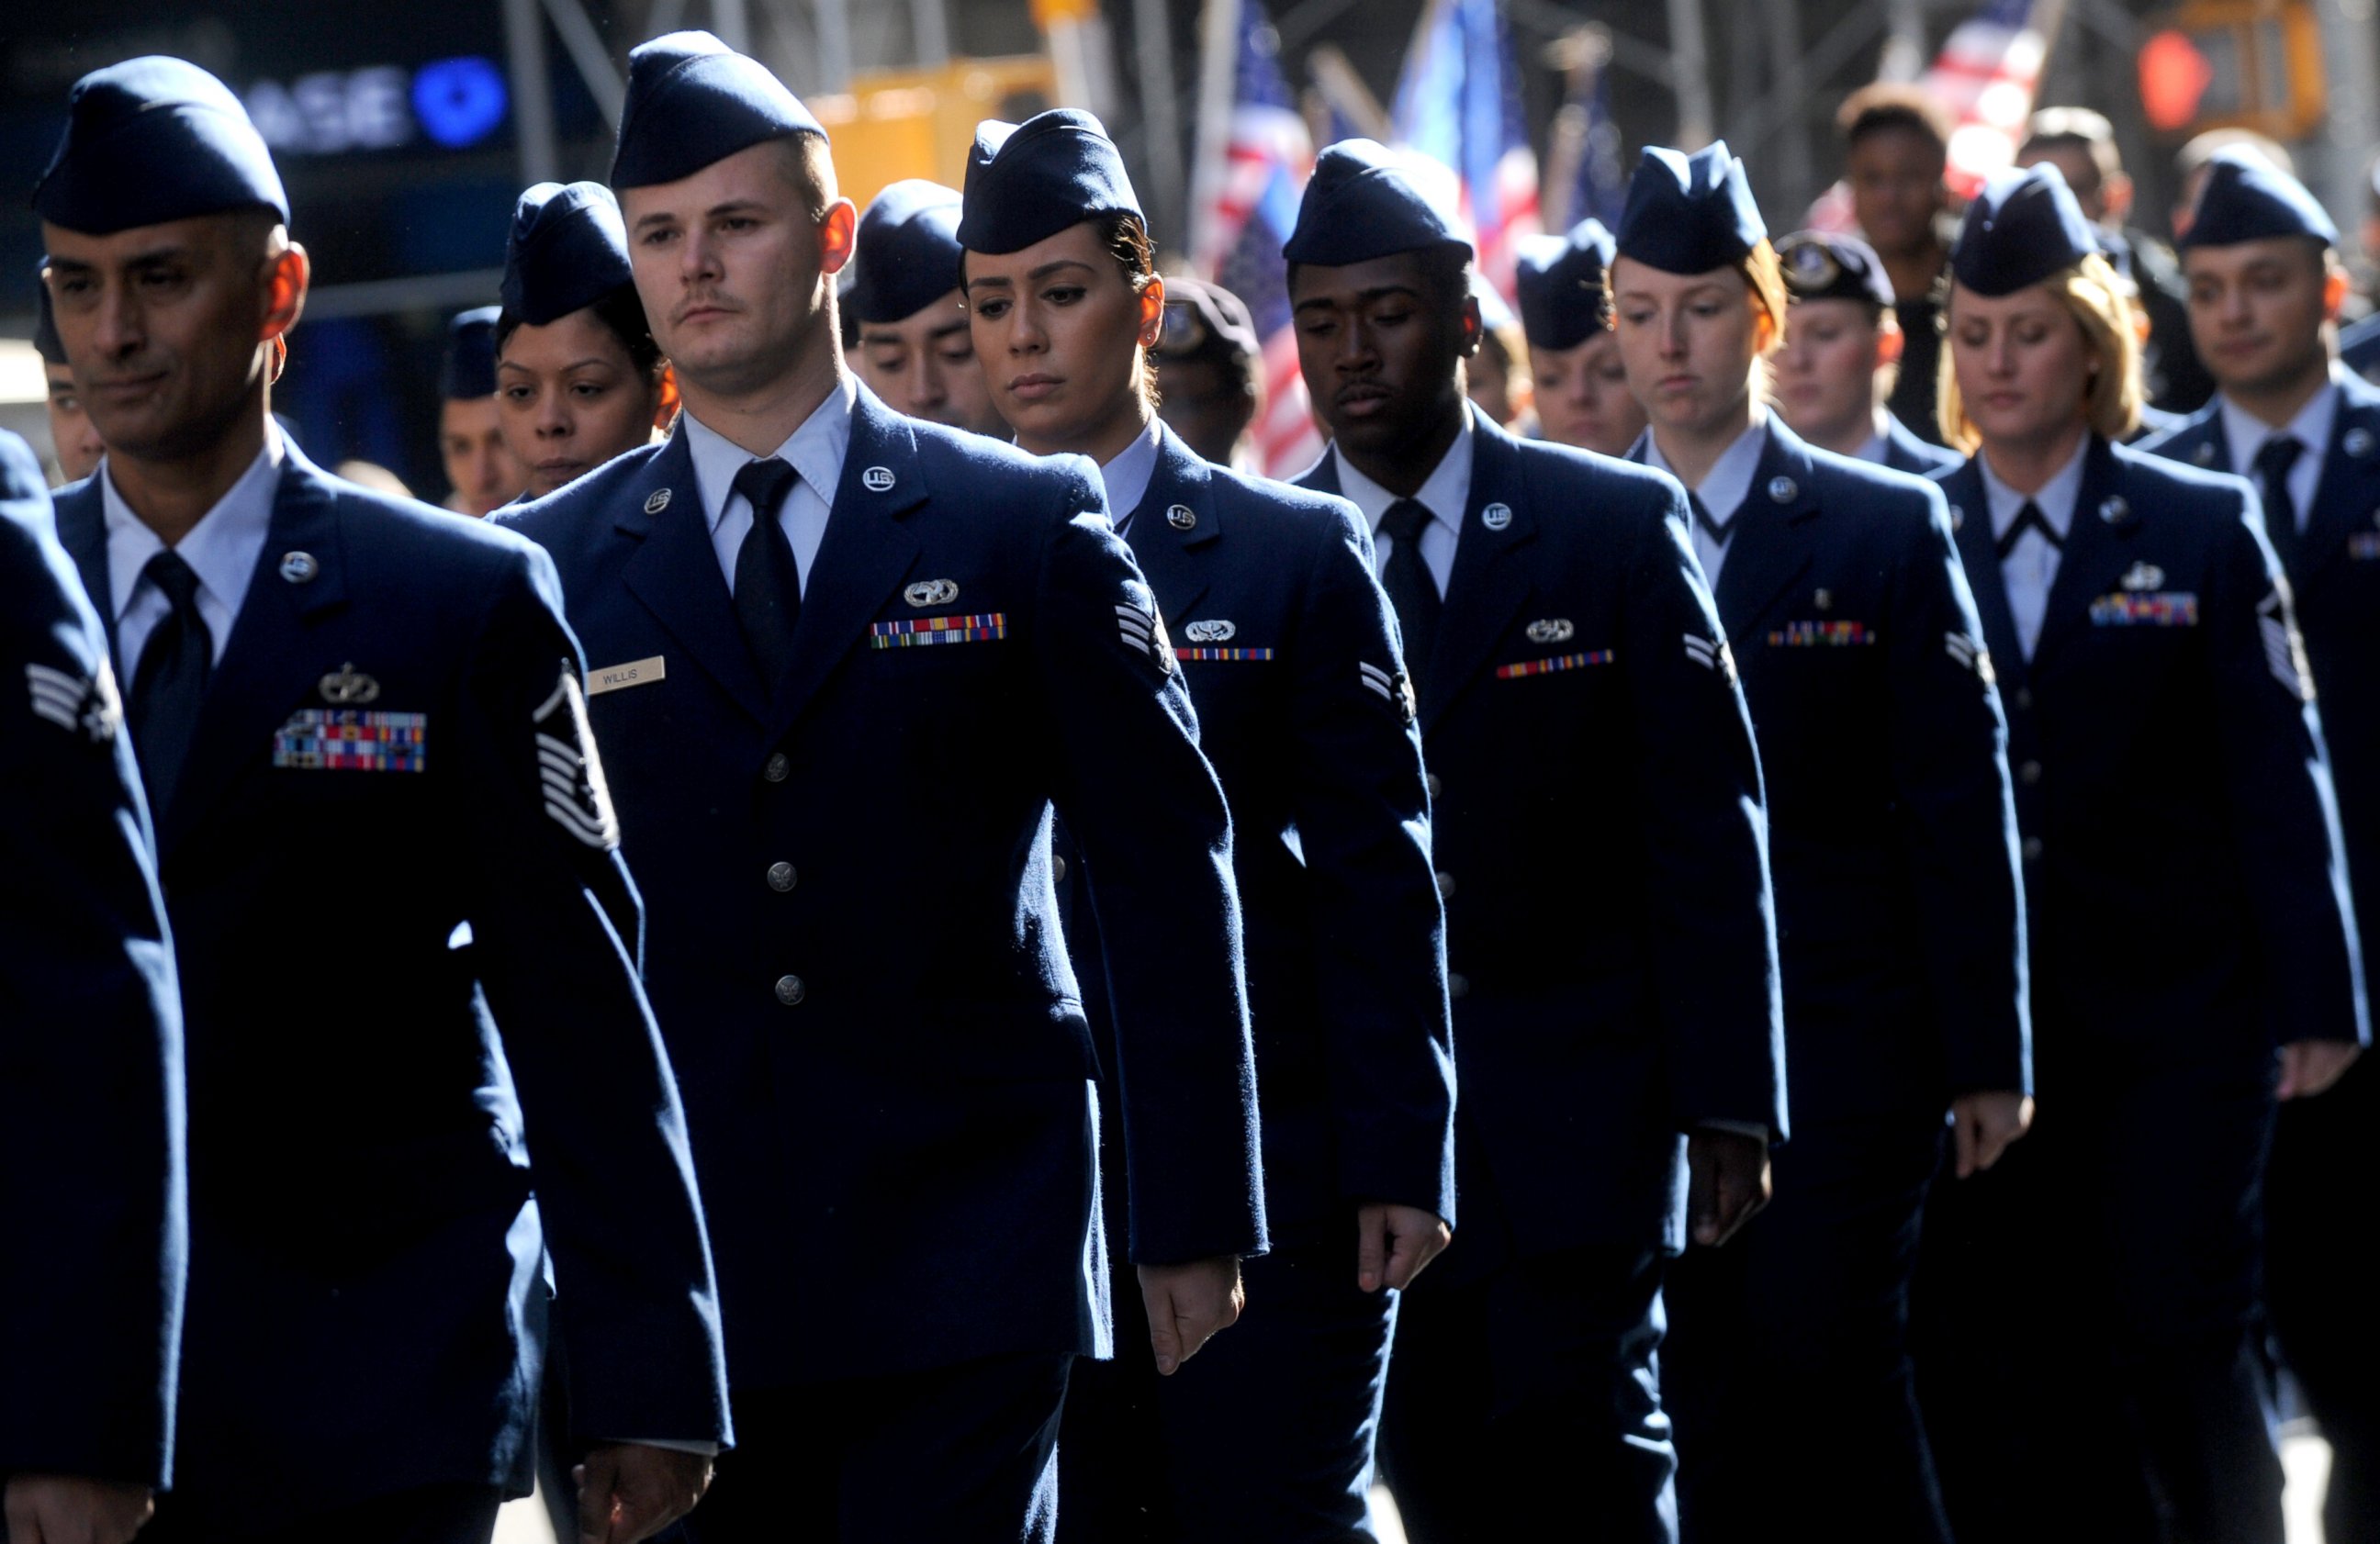 PHOTO: Members of the military march in a Veteran's Day Parade in New York, Nov. 11, 2015.